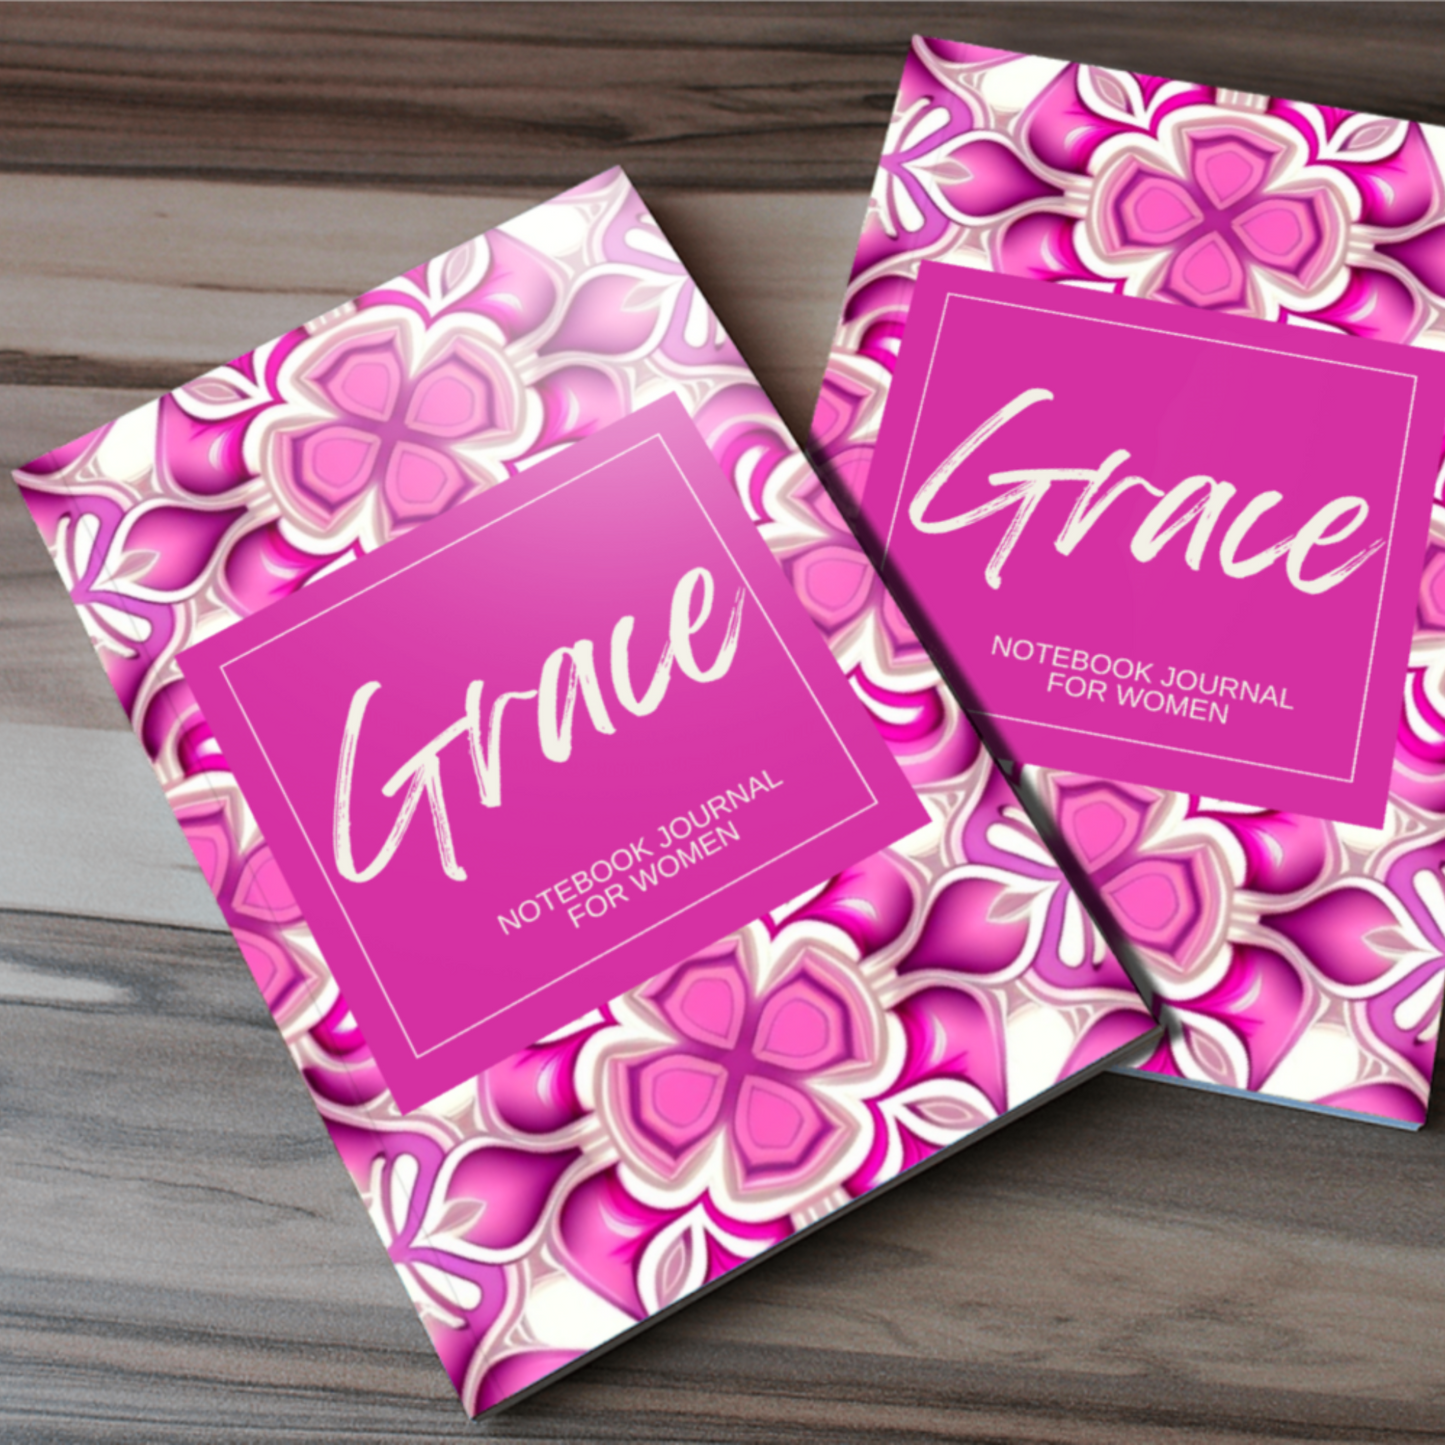 Grace Journal Notebook for KDP/Amazon